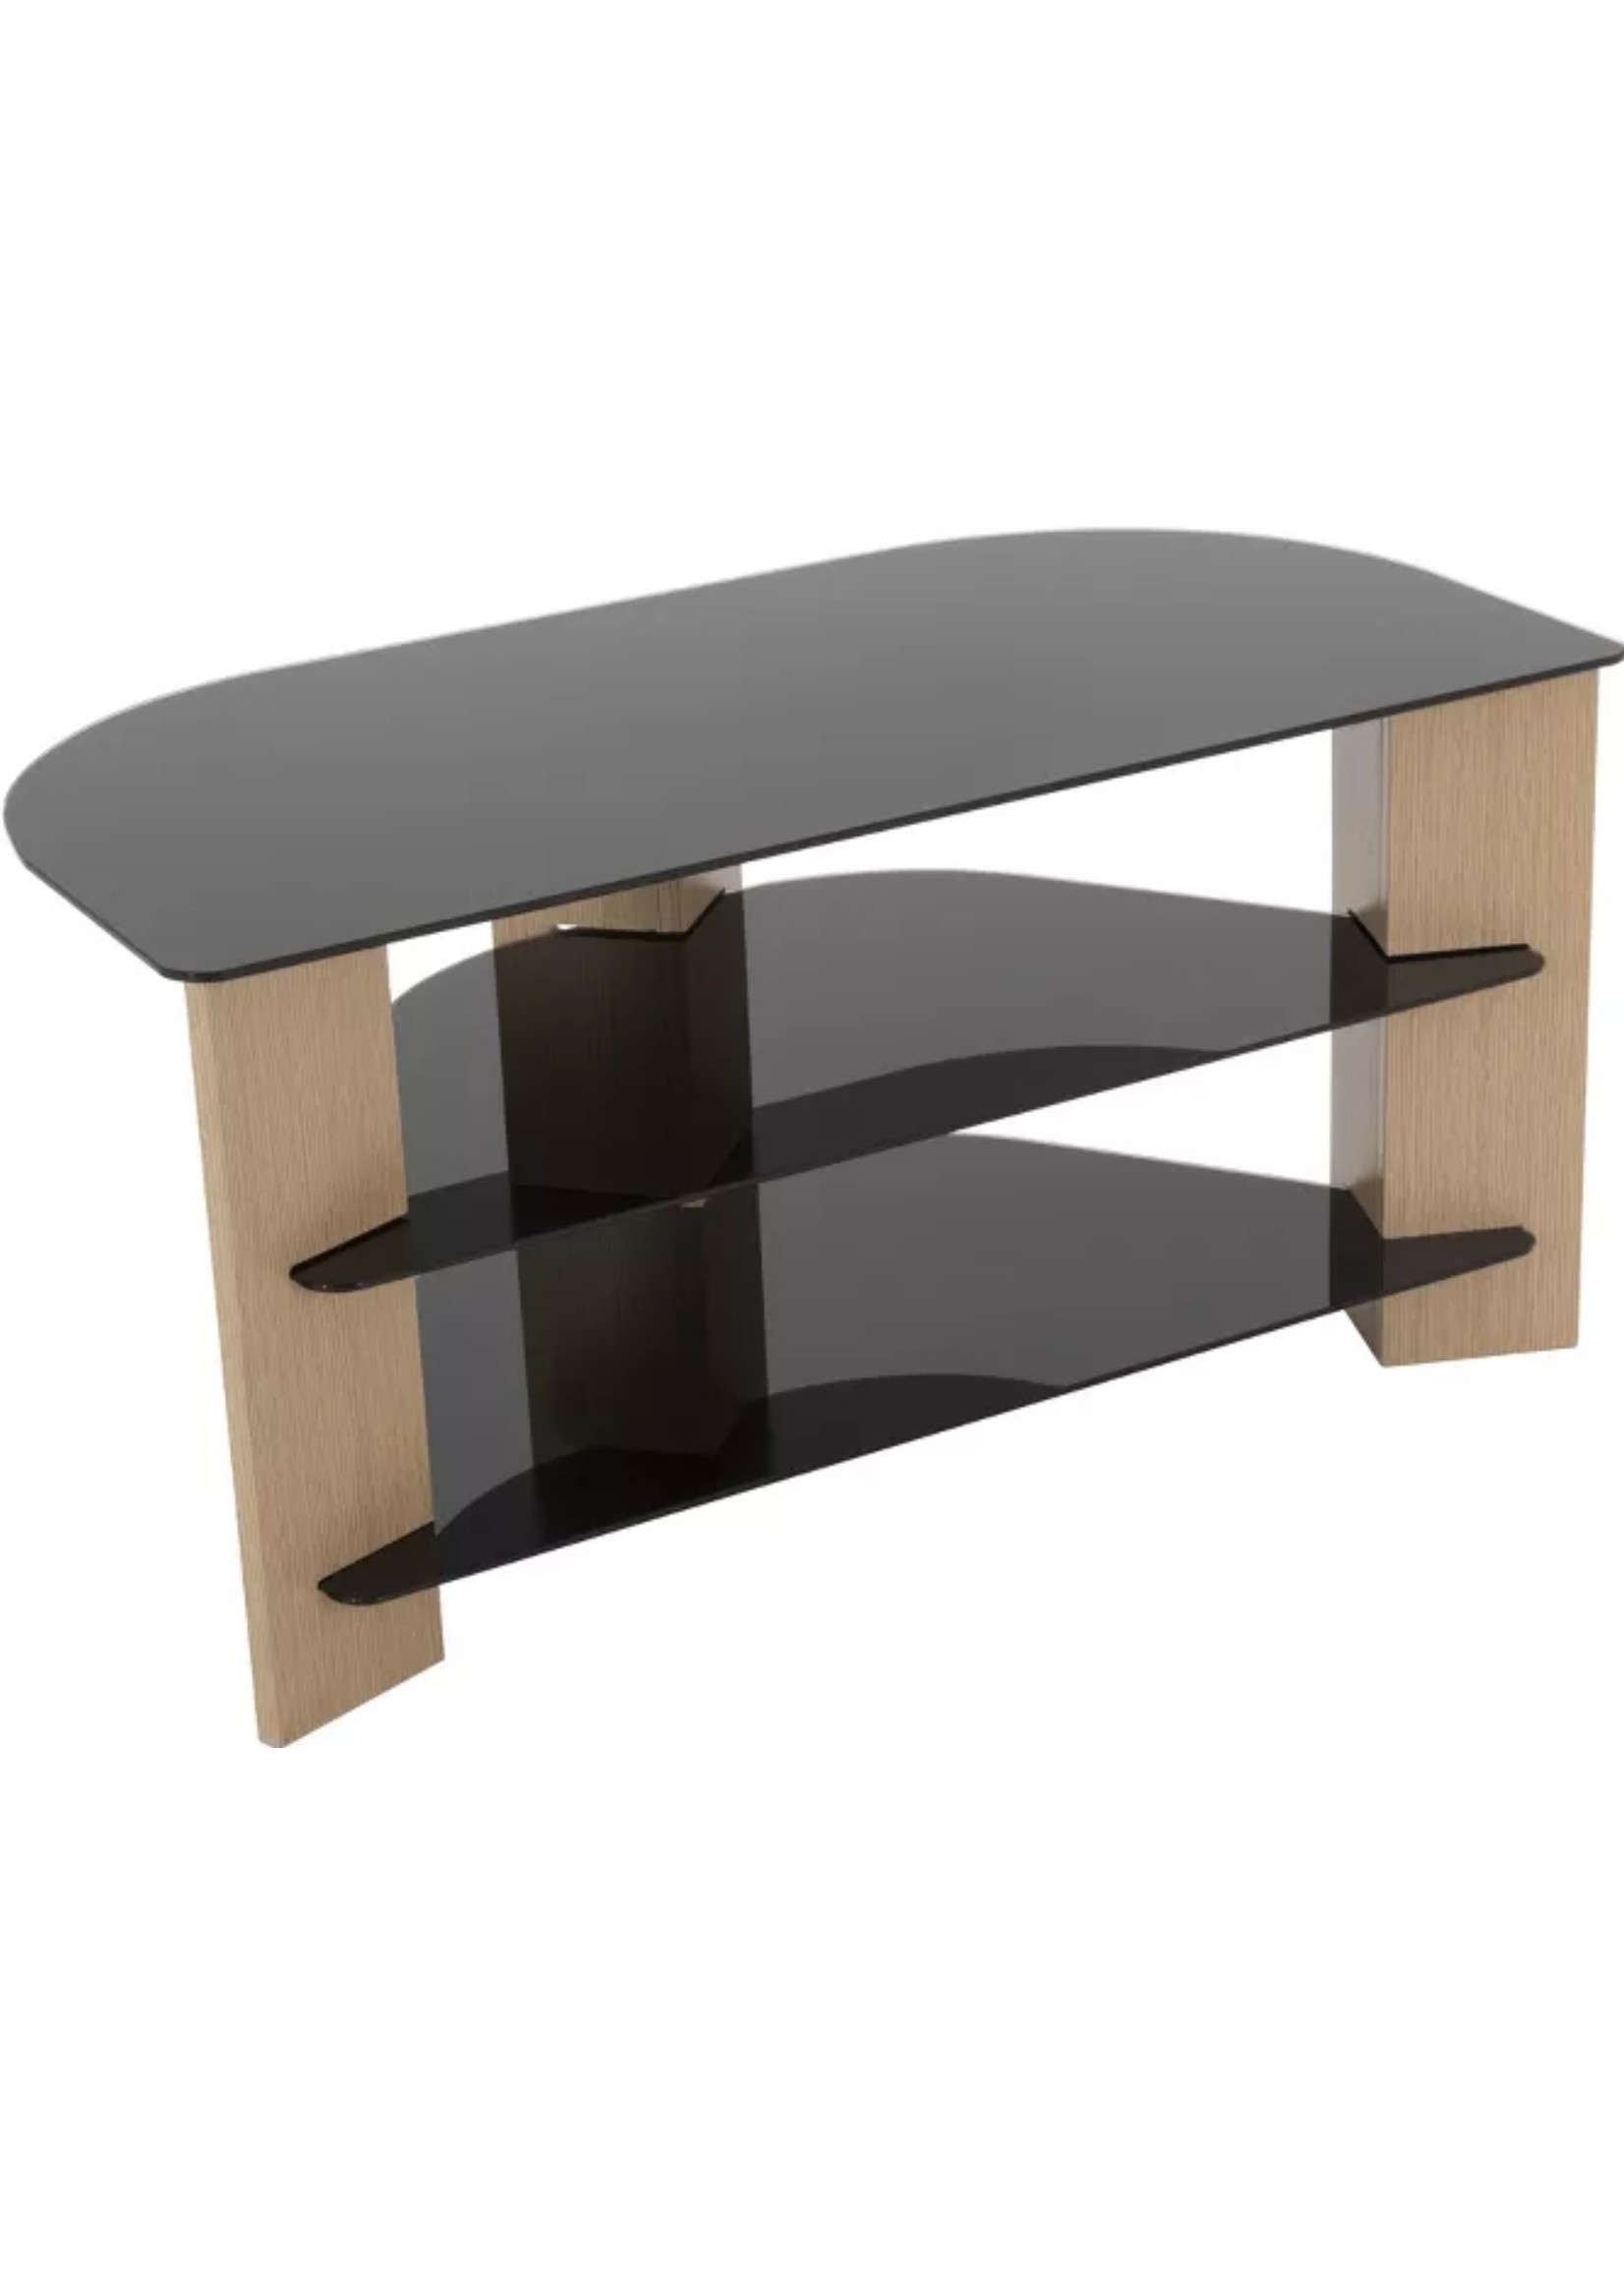 AVF Varano TV Stand with Black Glass Shelves for TVs up to 42" in Multiple Colors